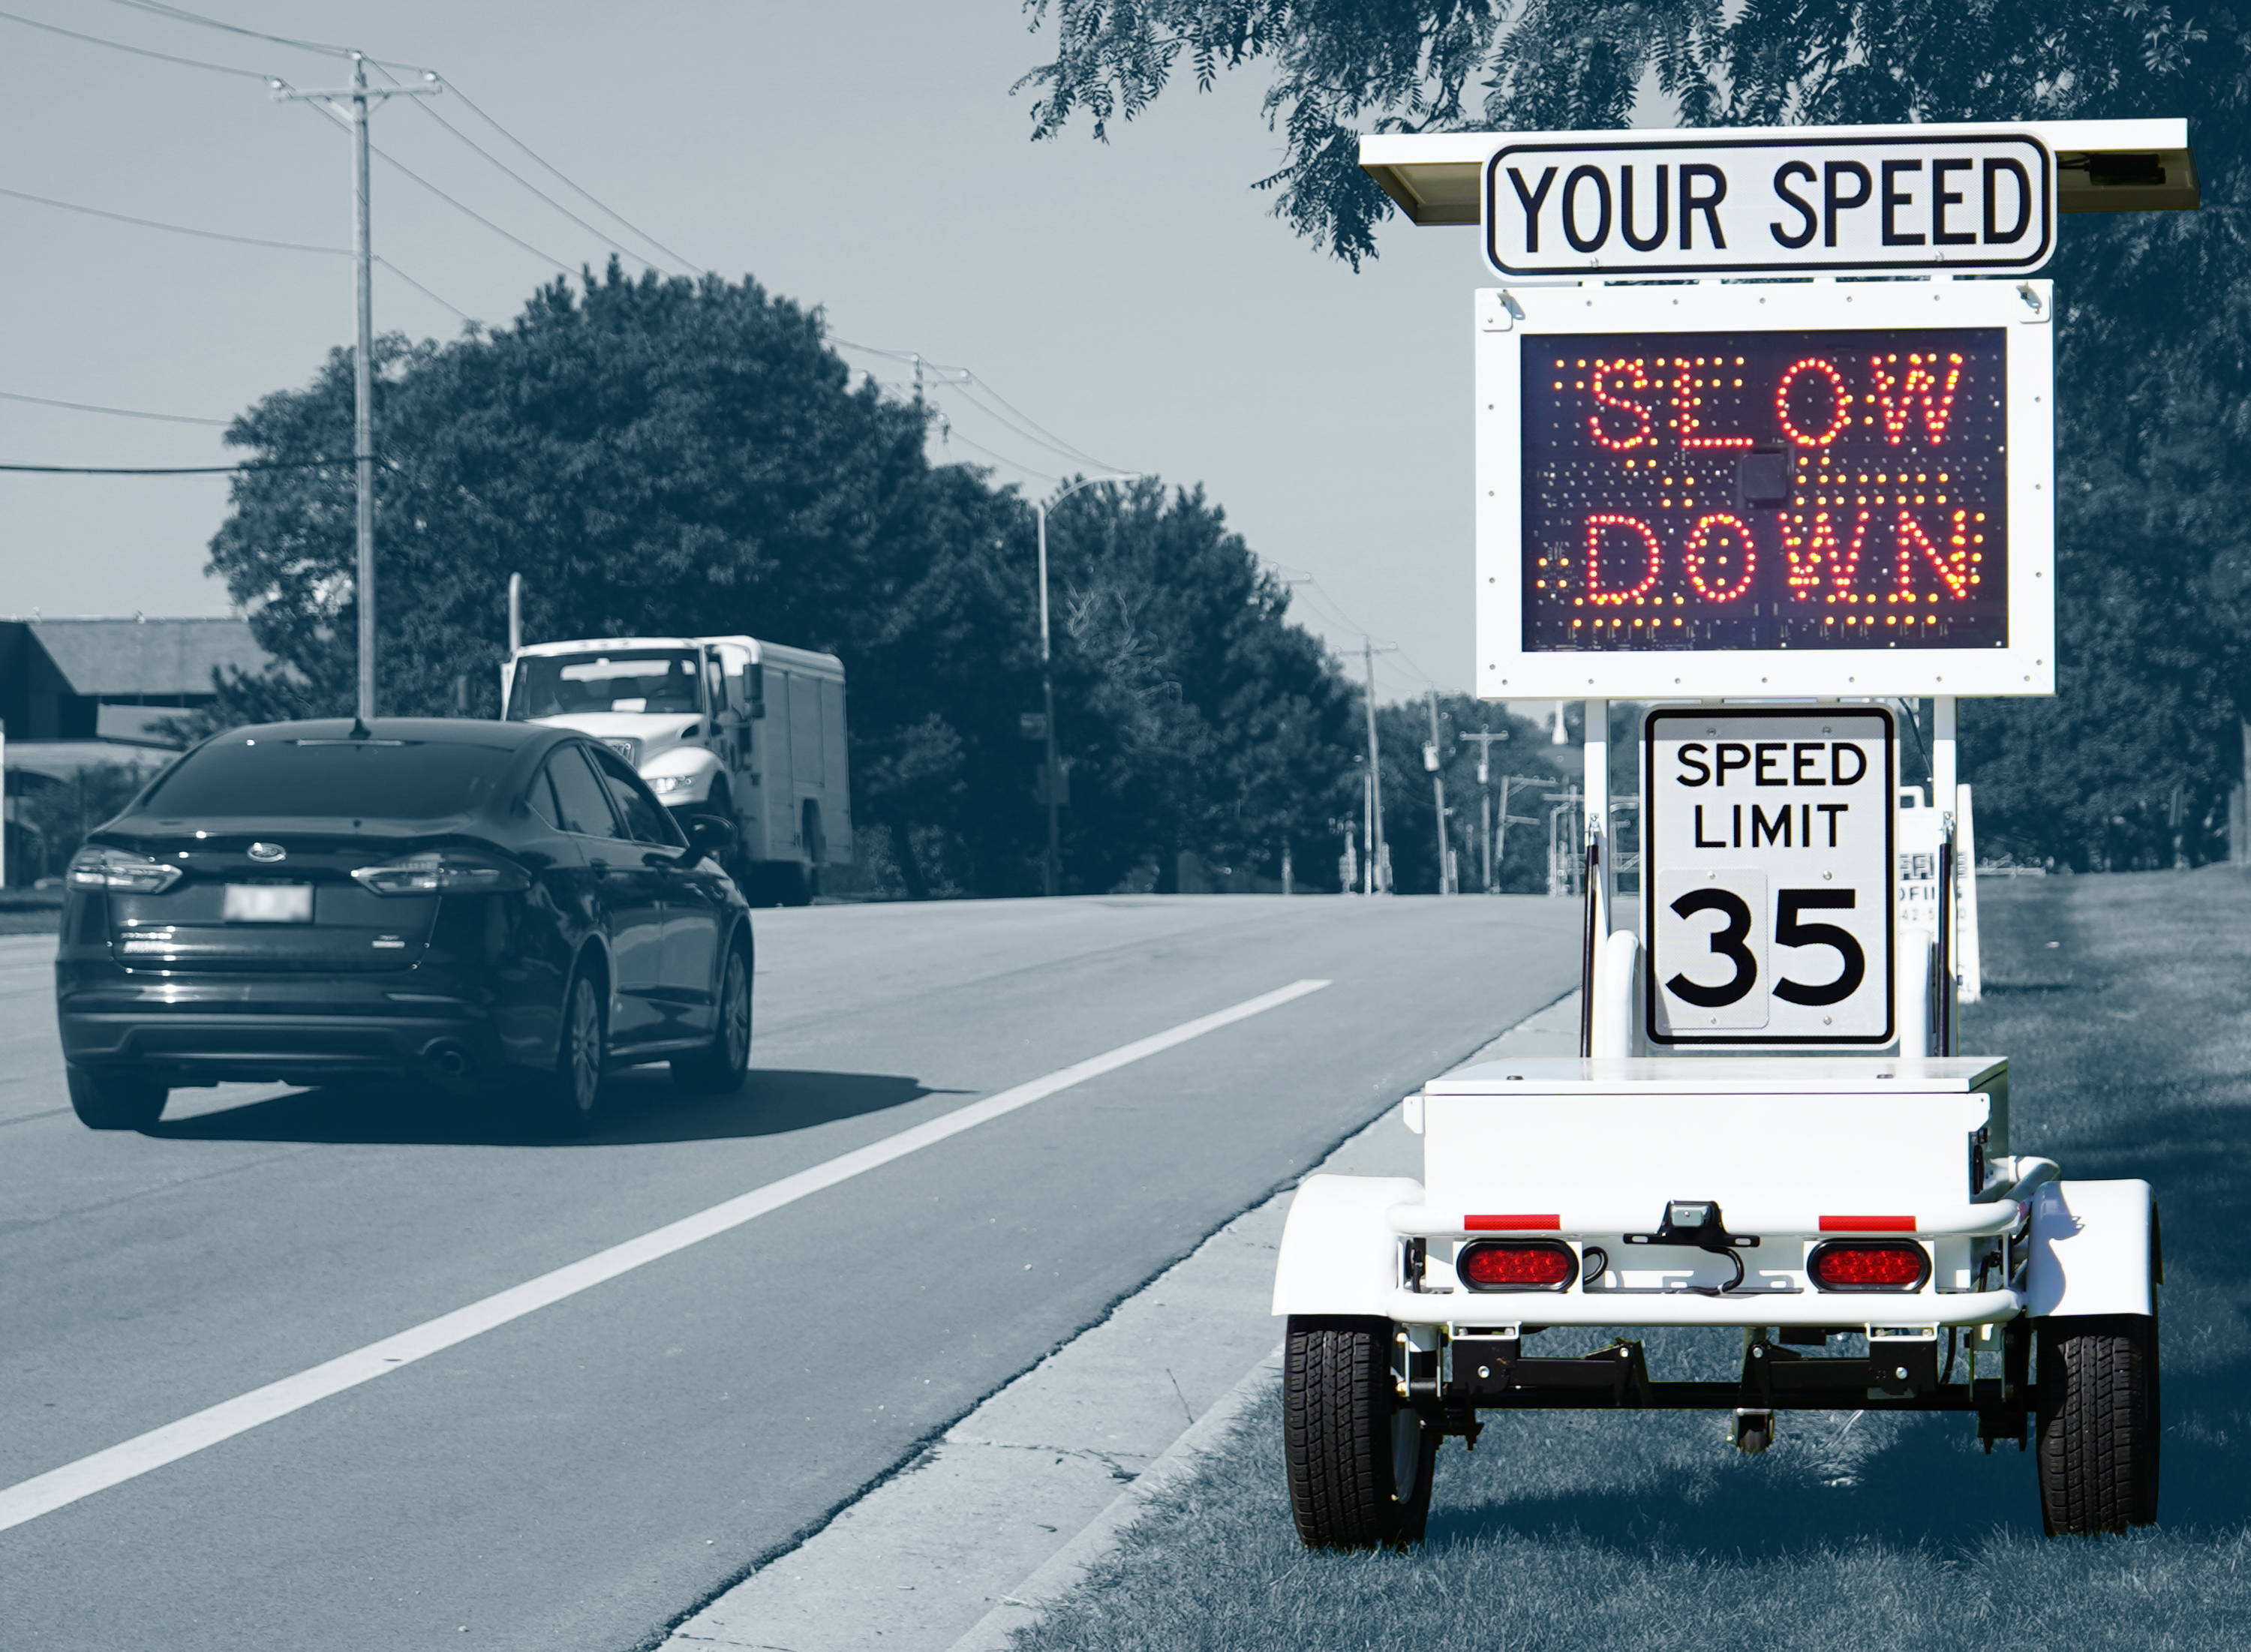 A radar speed trailer signals oncoming drivers to slow down.